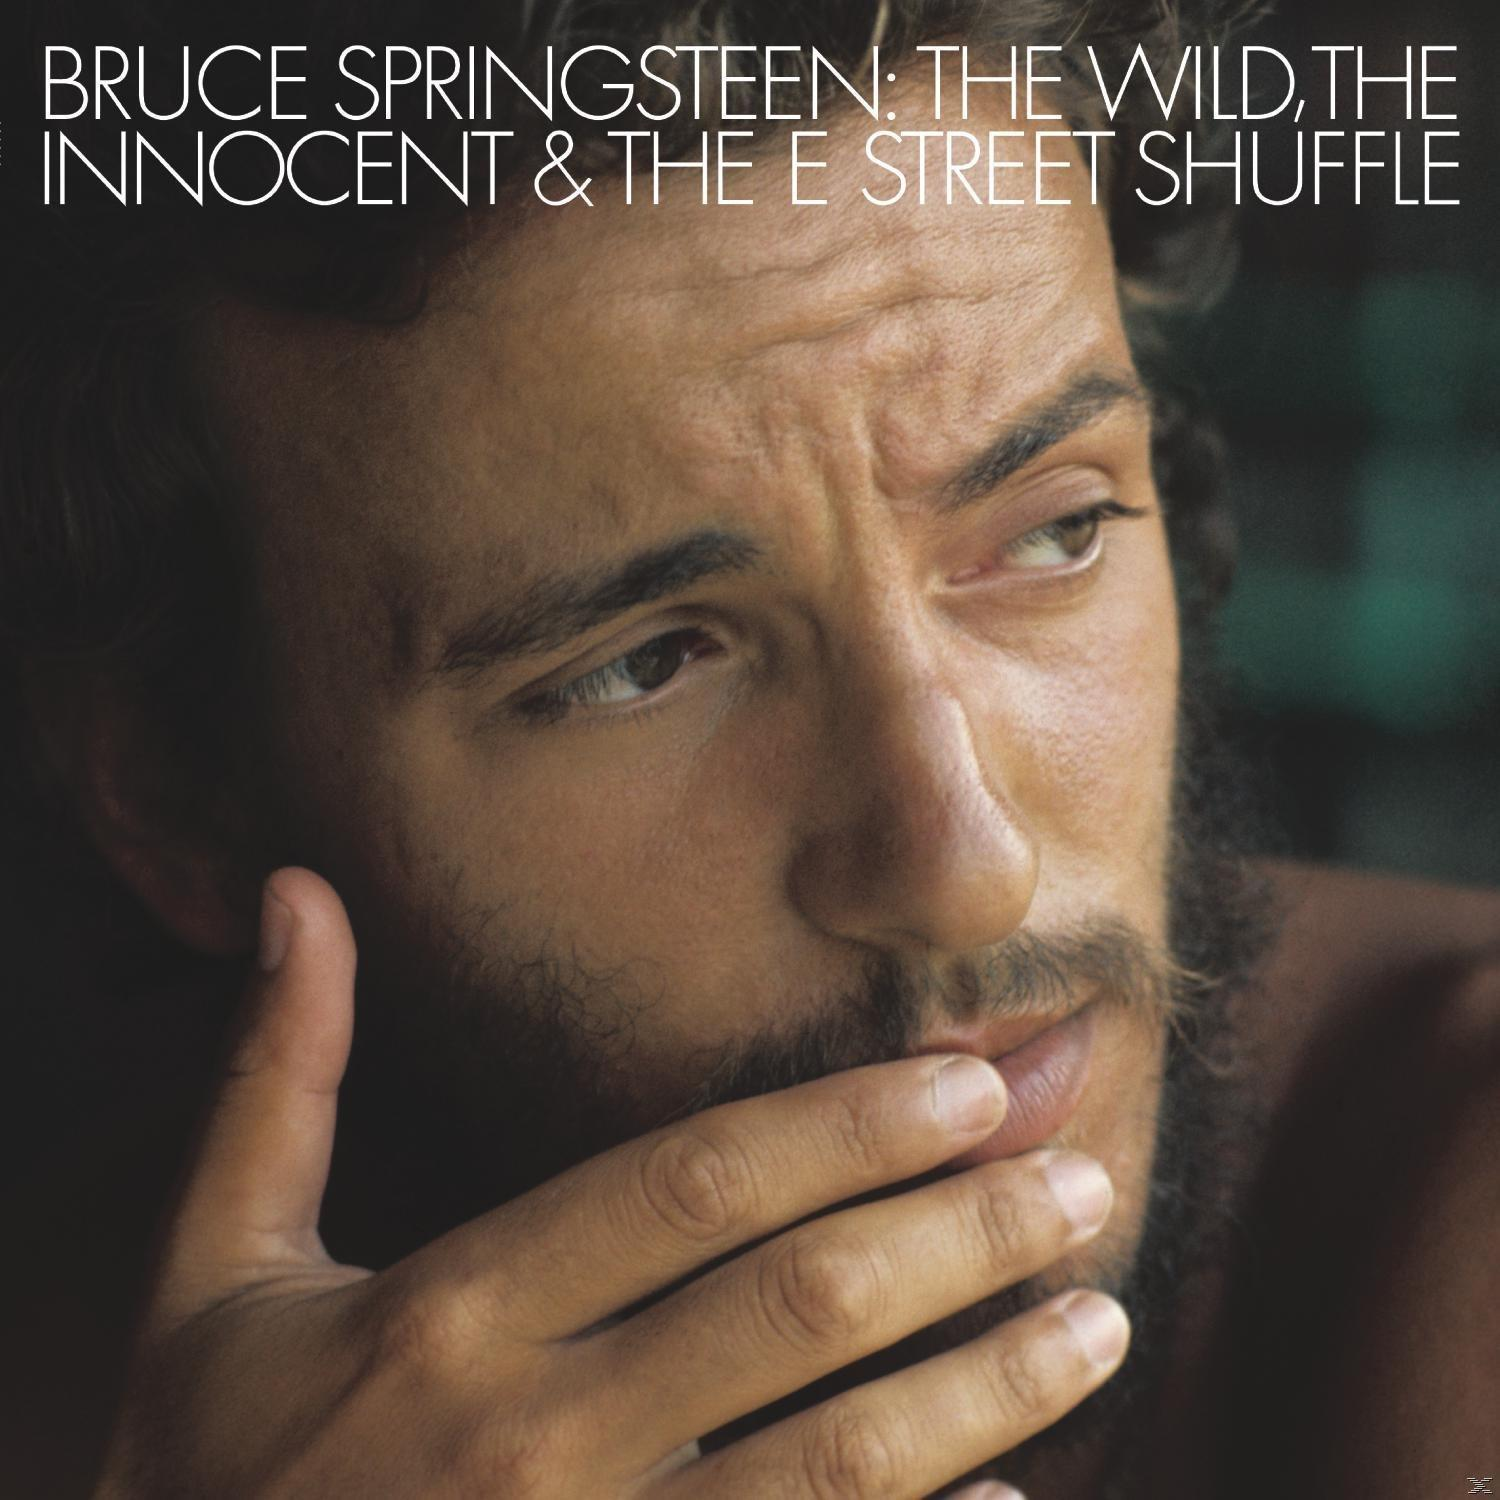 - Innocent Springsteen Wild, The E The The Shuffle (Vinyl) Street Bruce And -